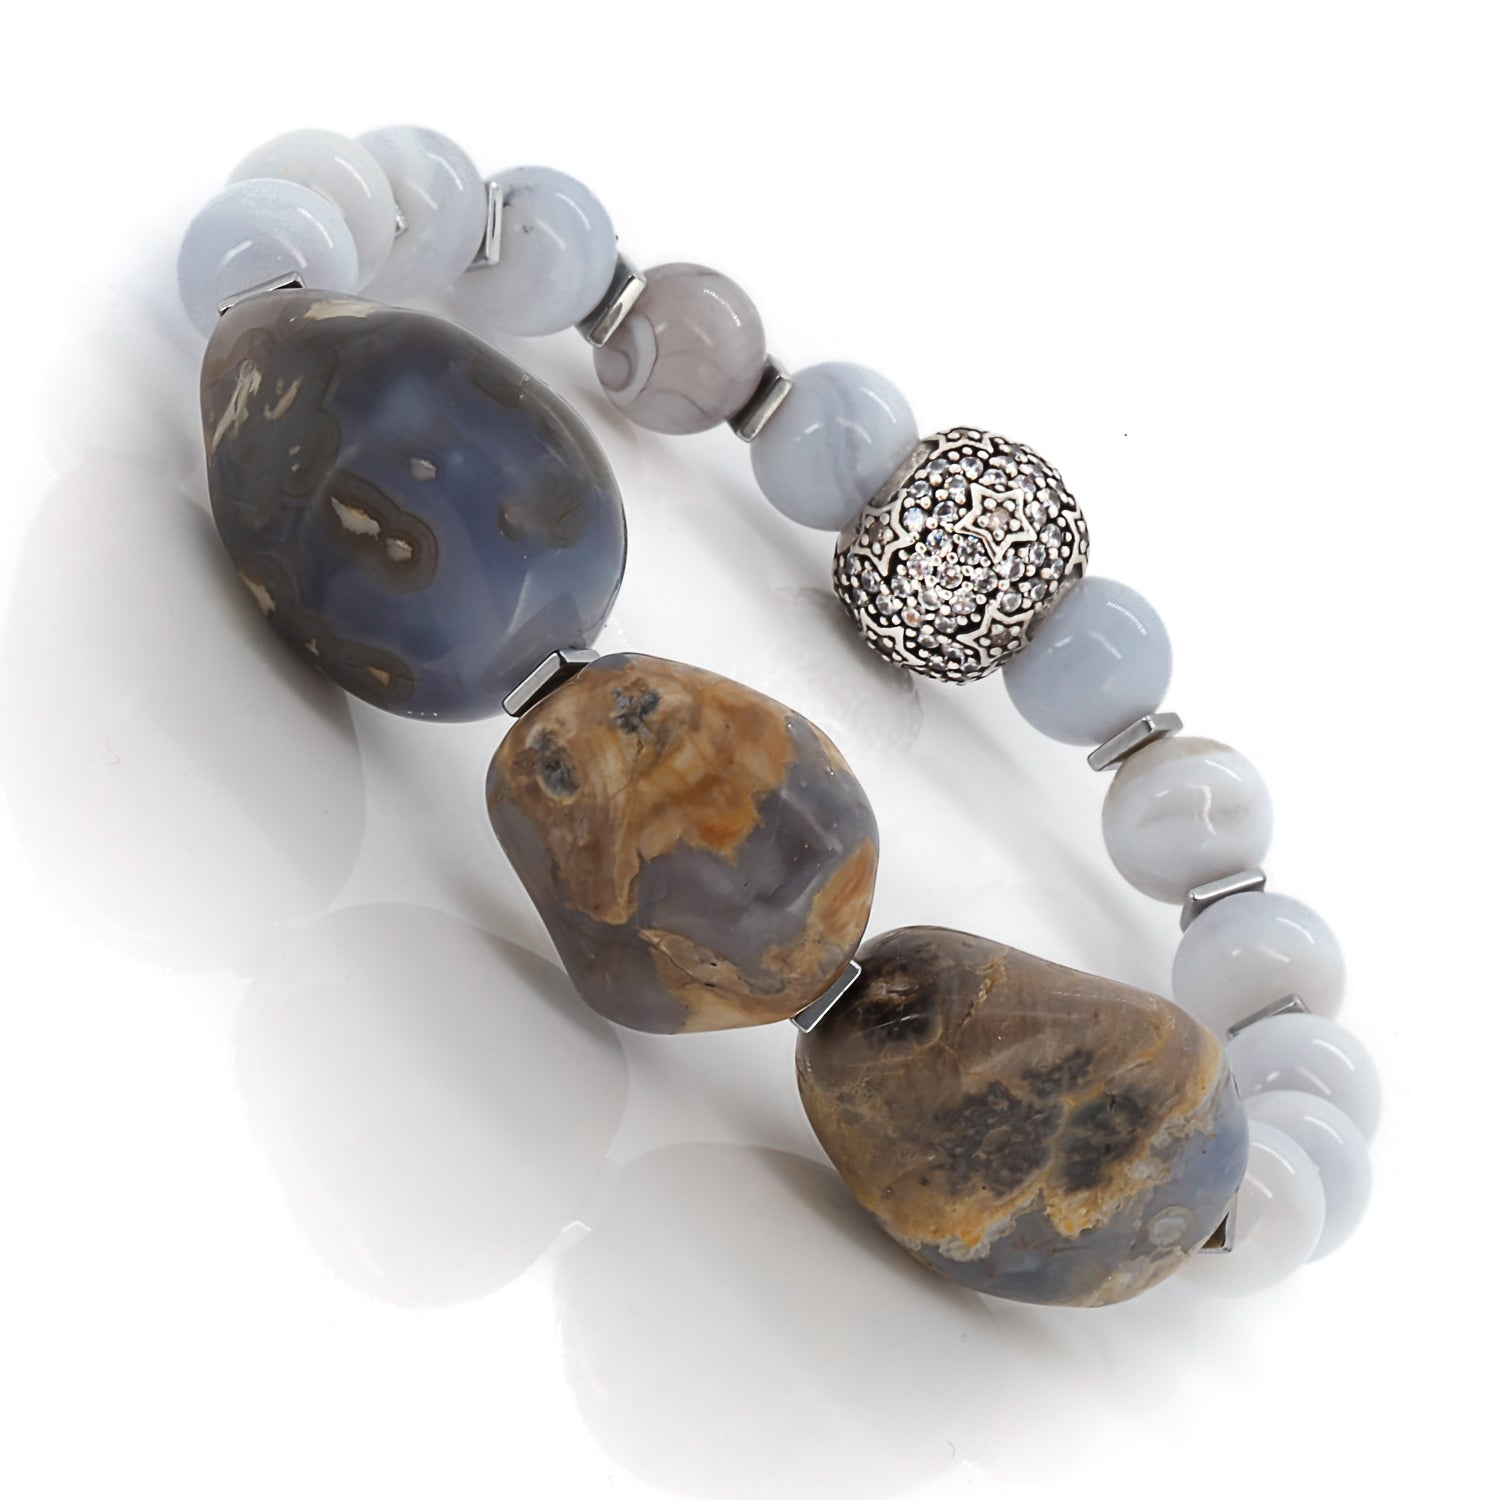 Large Lace Agate Beads - Intricate patterns resembling nature&#39;s canvas.